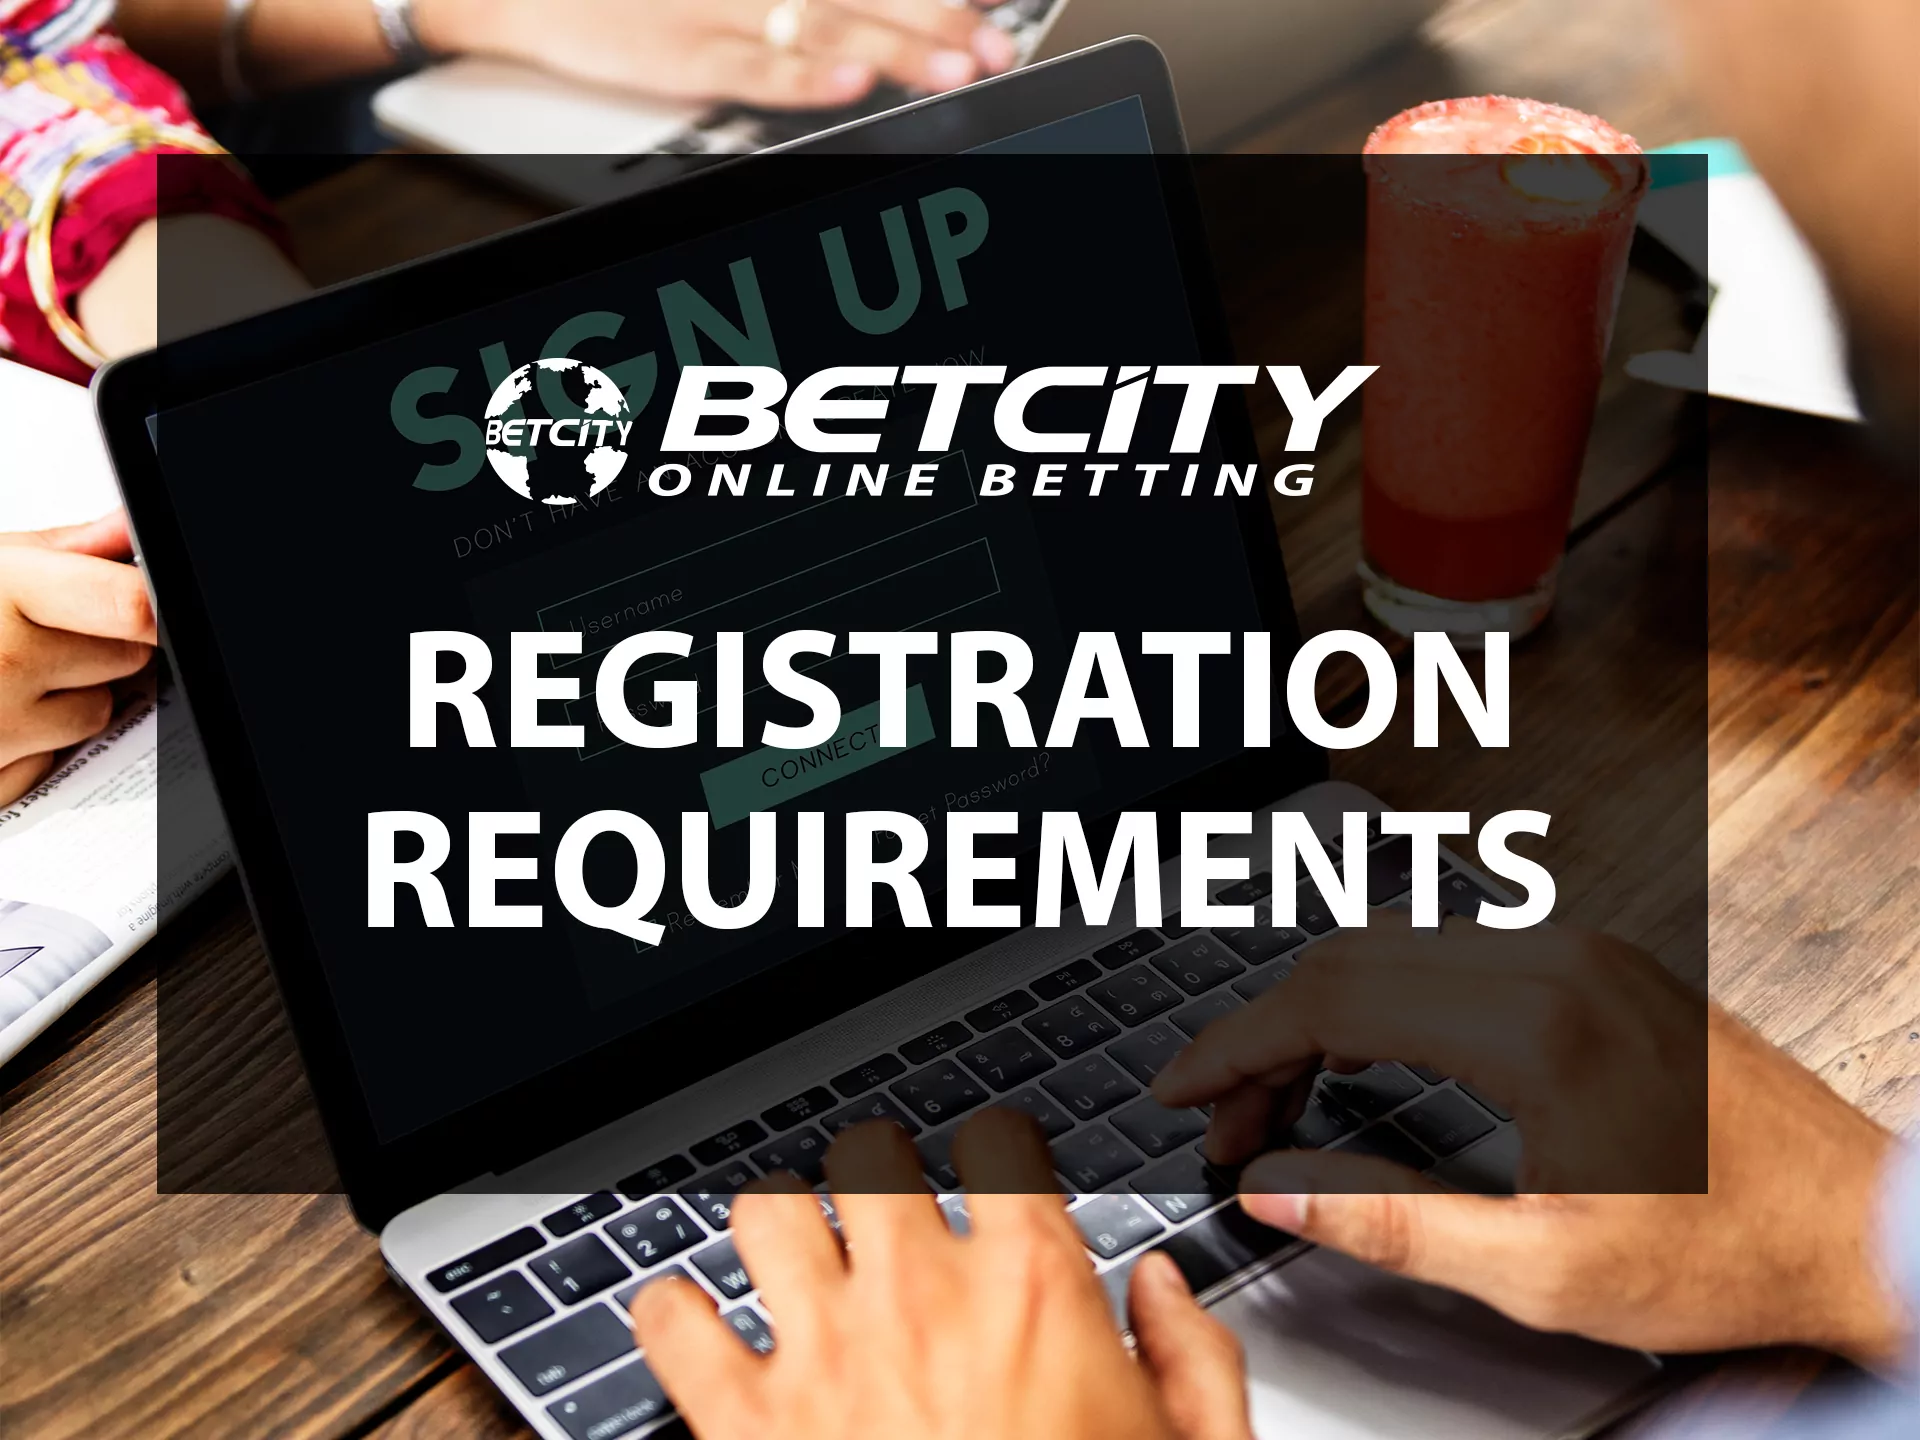 You should meet the requirements to have an account on Betcity.